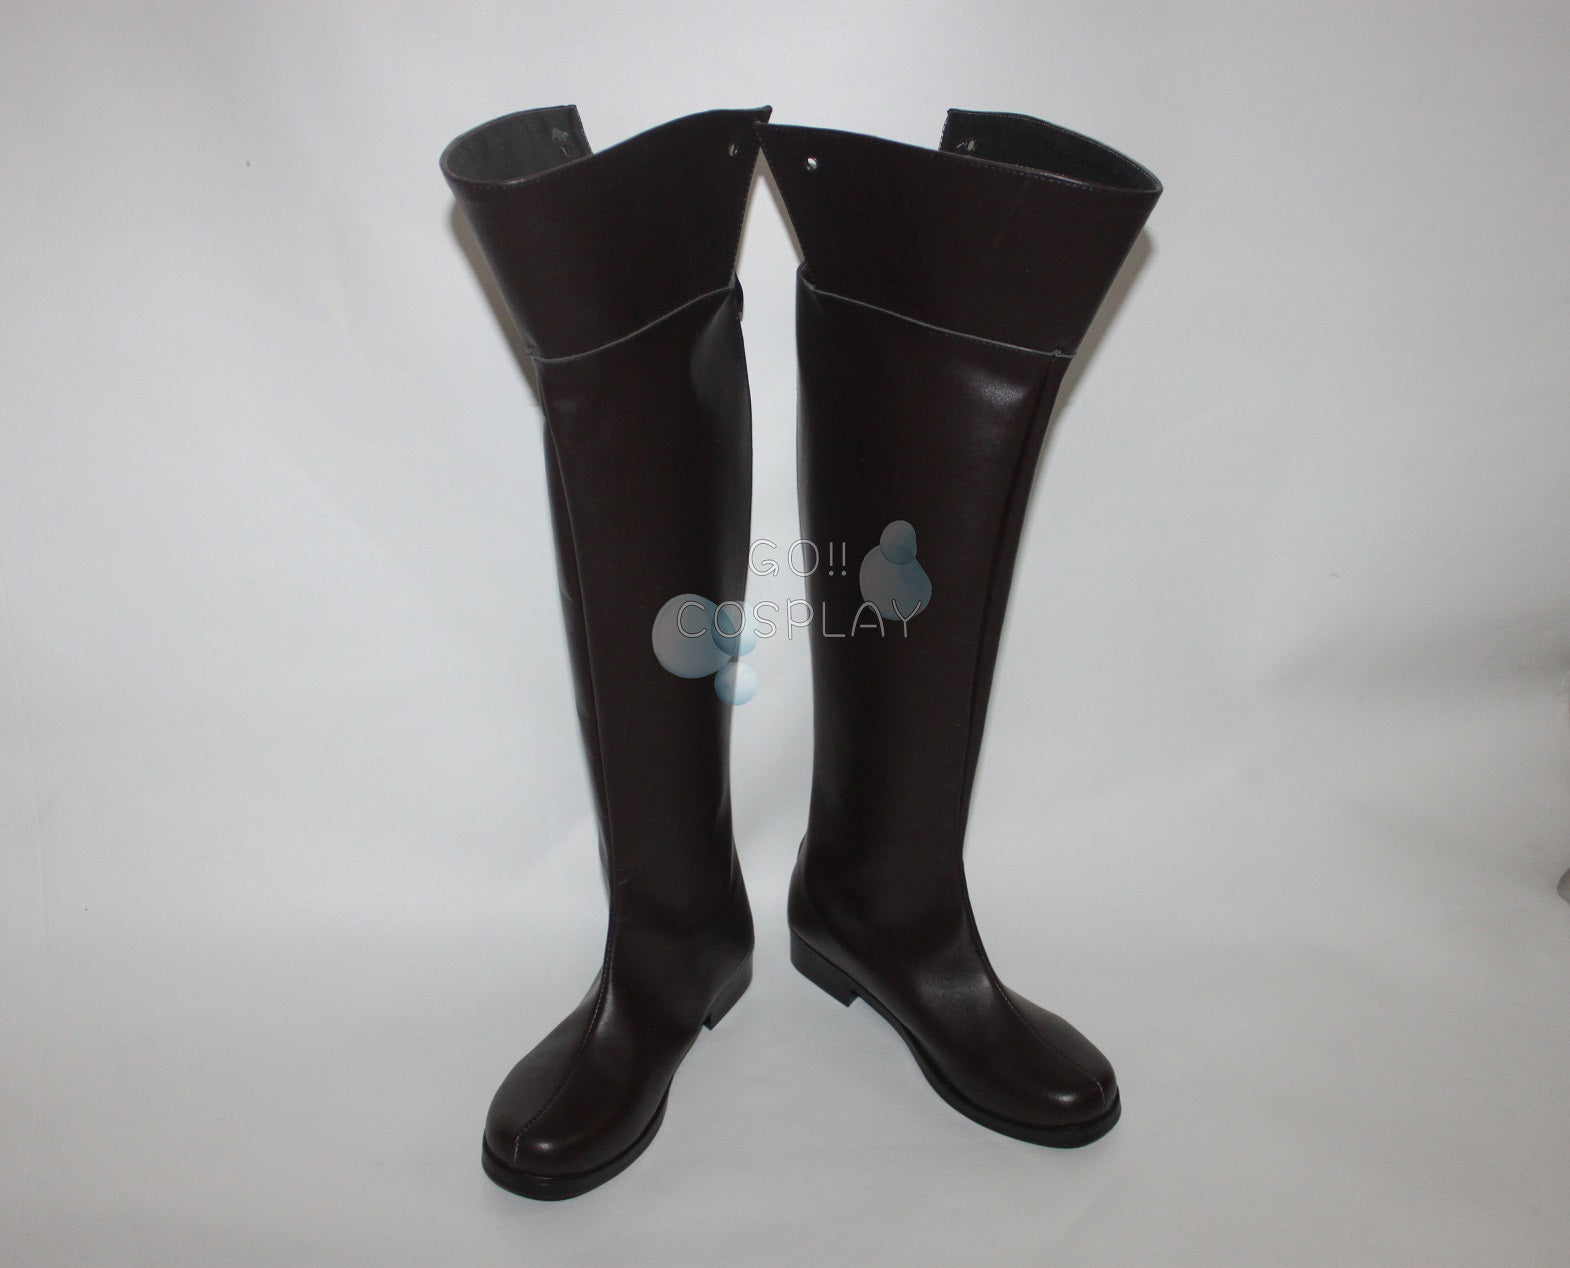 Attack on Titan Boots Cosplay Buy